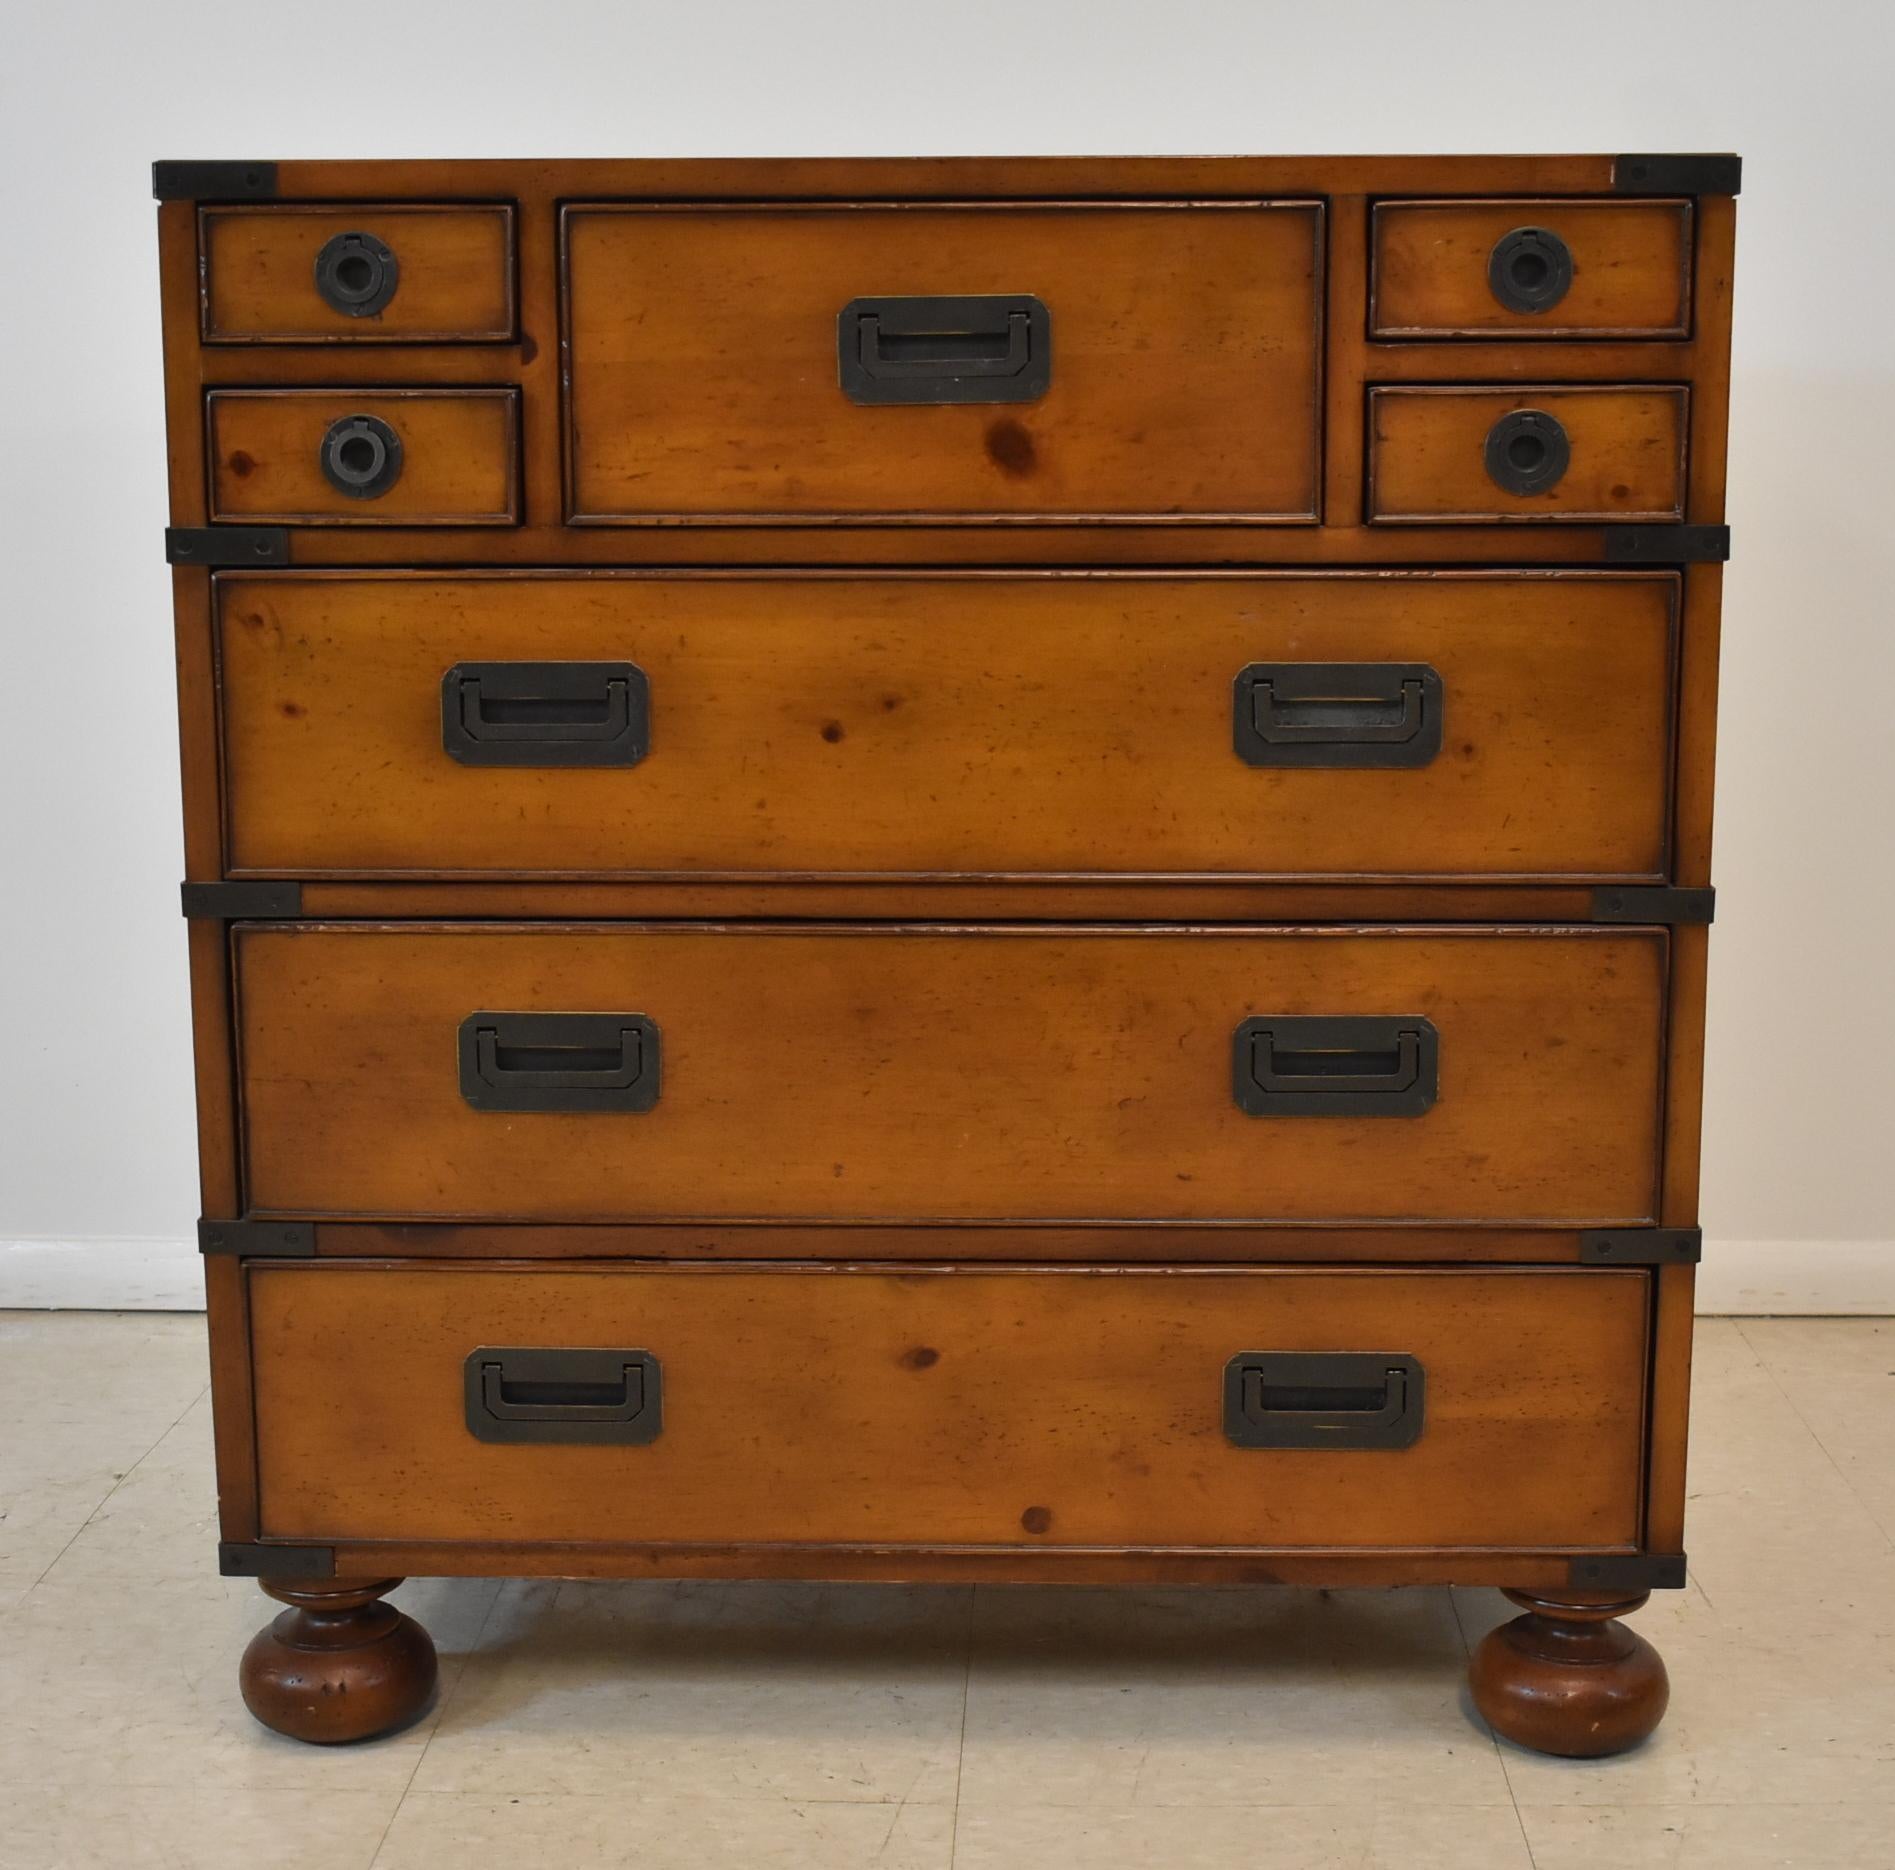 Milling Road collection division of Baker Furniture Campaign chest. Eight drawers have iron corner bands. Bun feet. Distressed factory finish in very good condition. Top has a couple small finish spots.